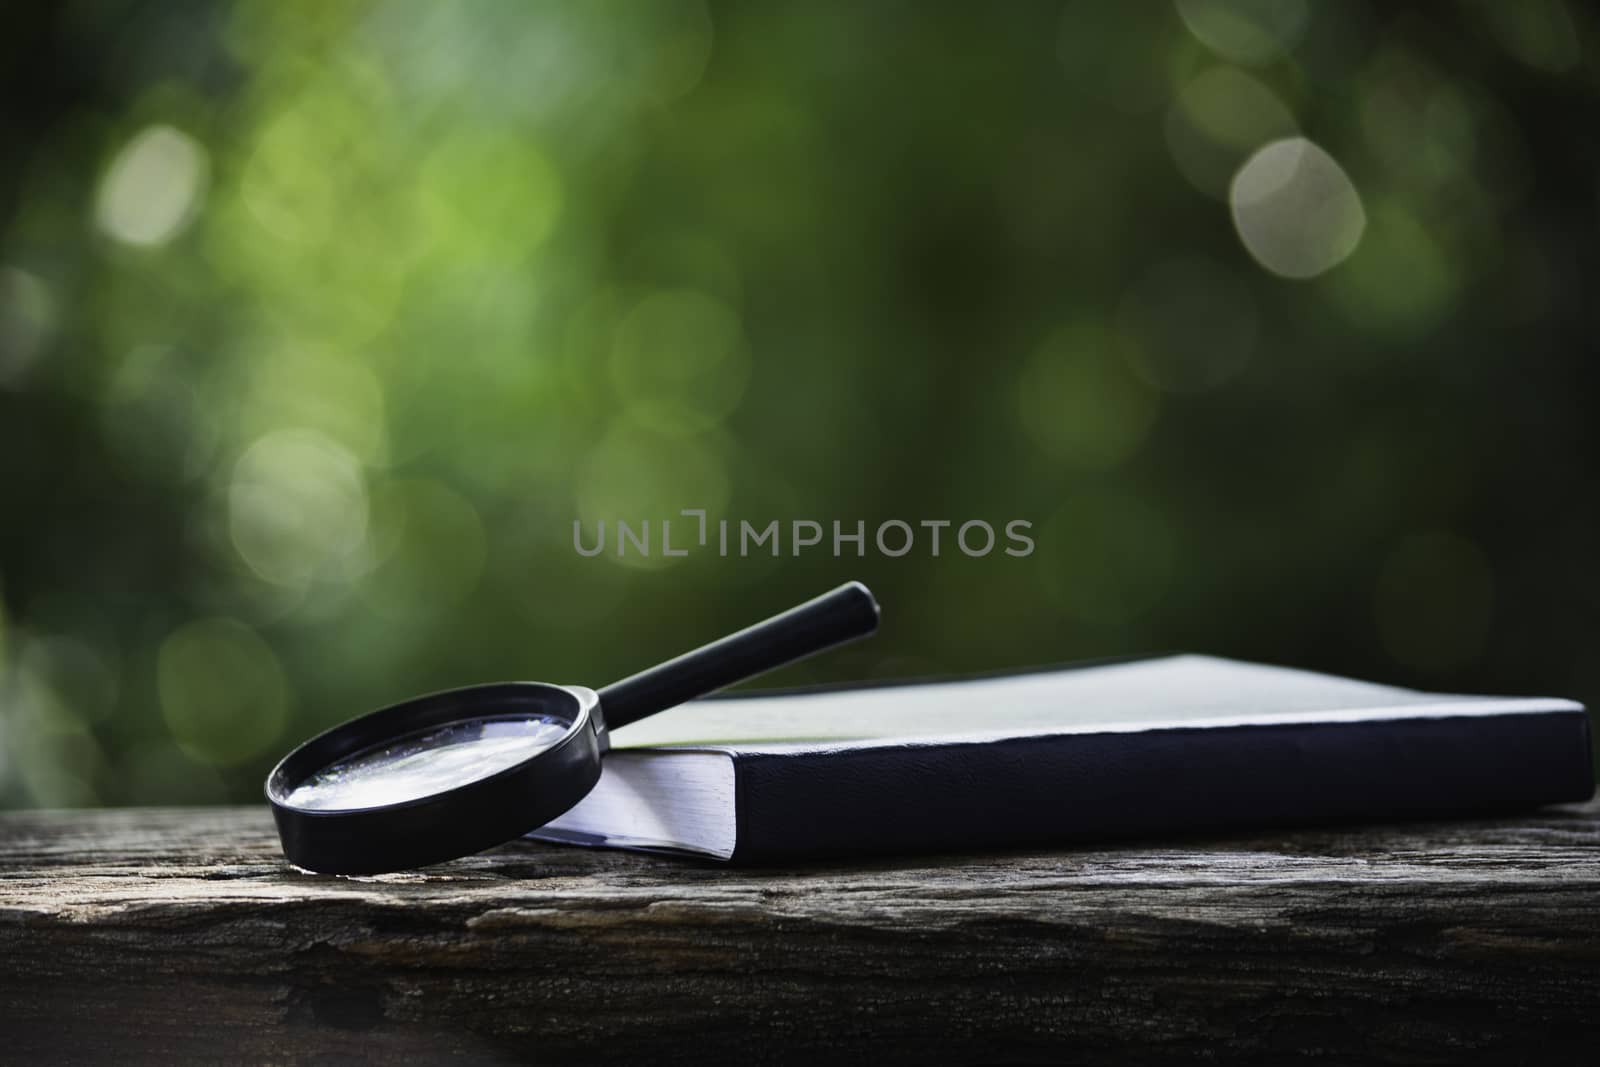 Magnifying glass and book on wooden table and copy space for insert text.